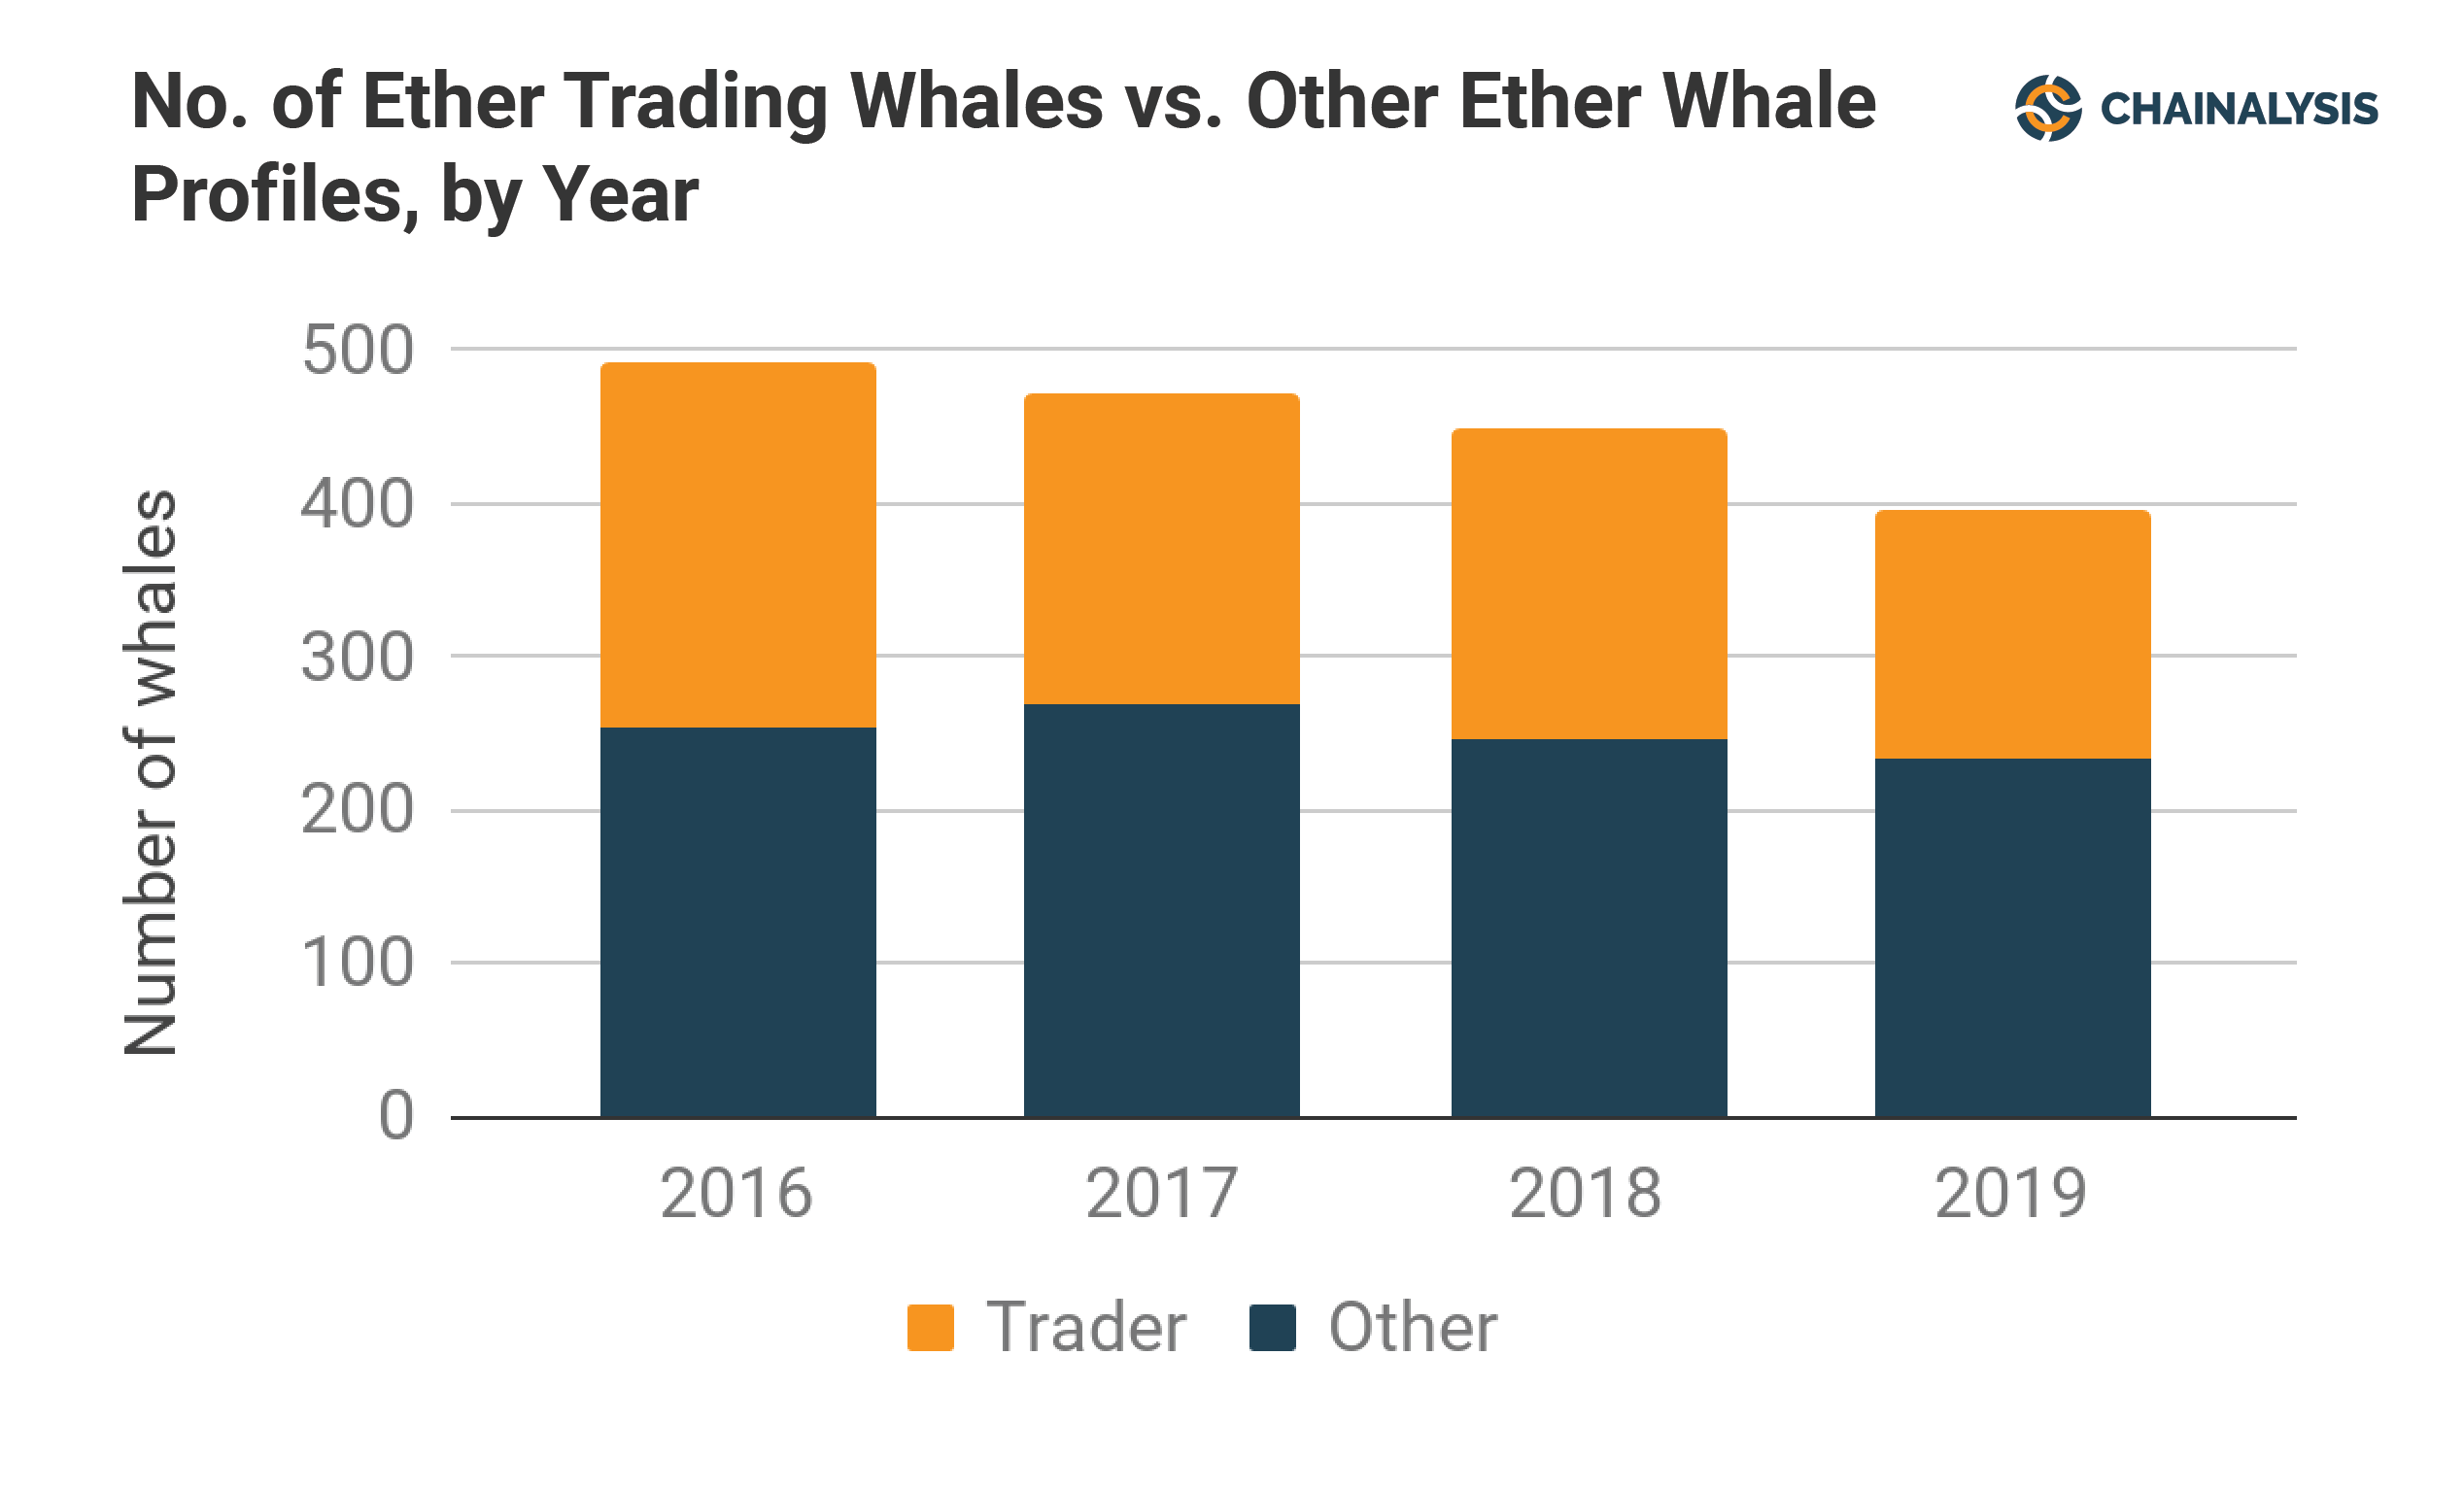 Number of whales trading per year